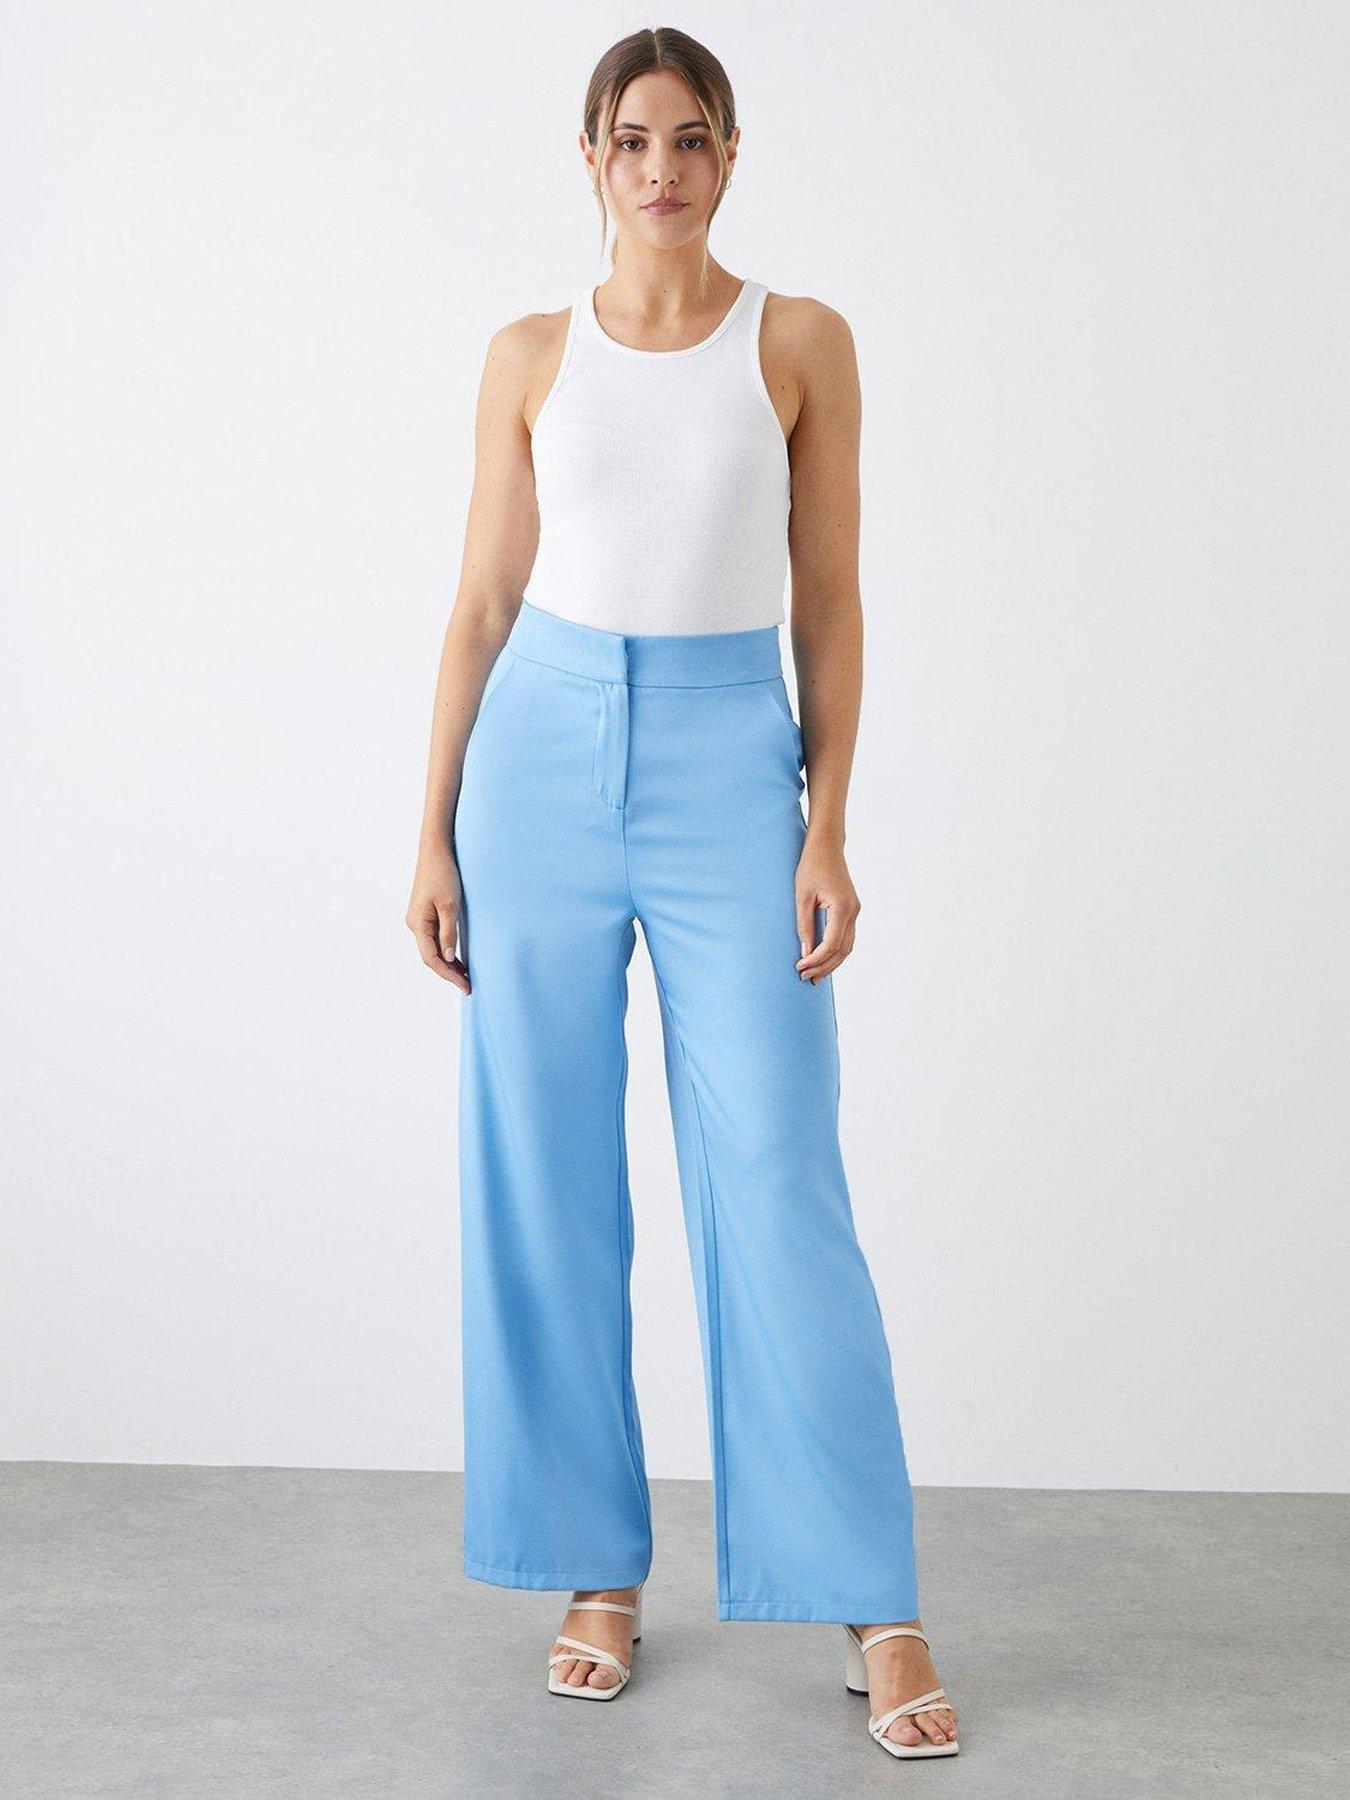 Culotes Women's Wide-Legged Pants Long [Code 222] Wide-Legged Trousers easy  to match